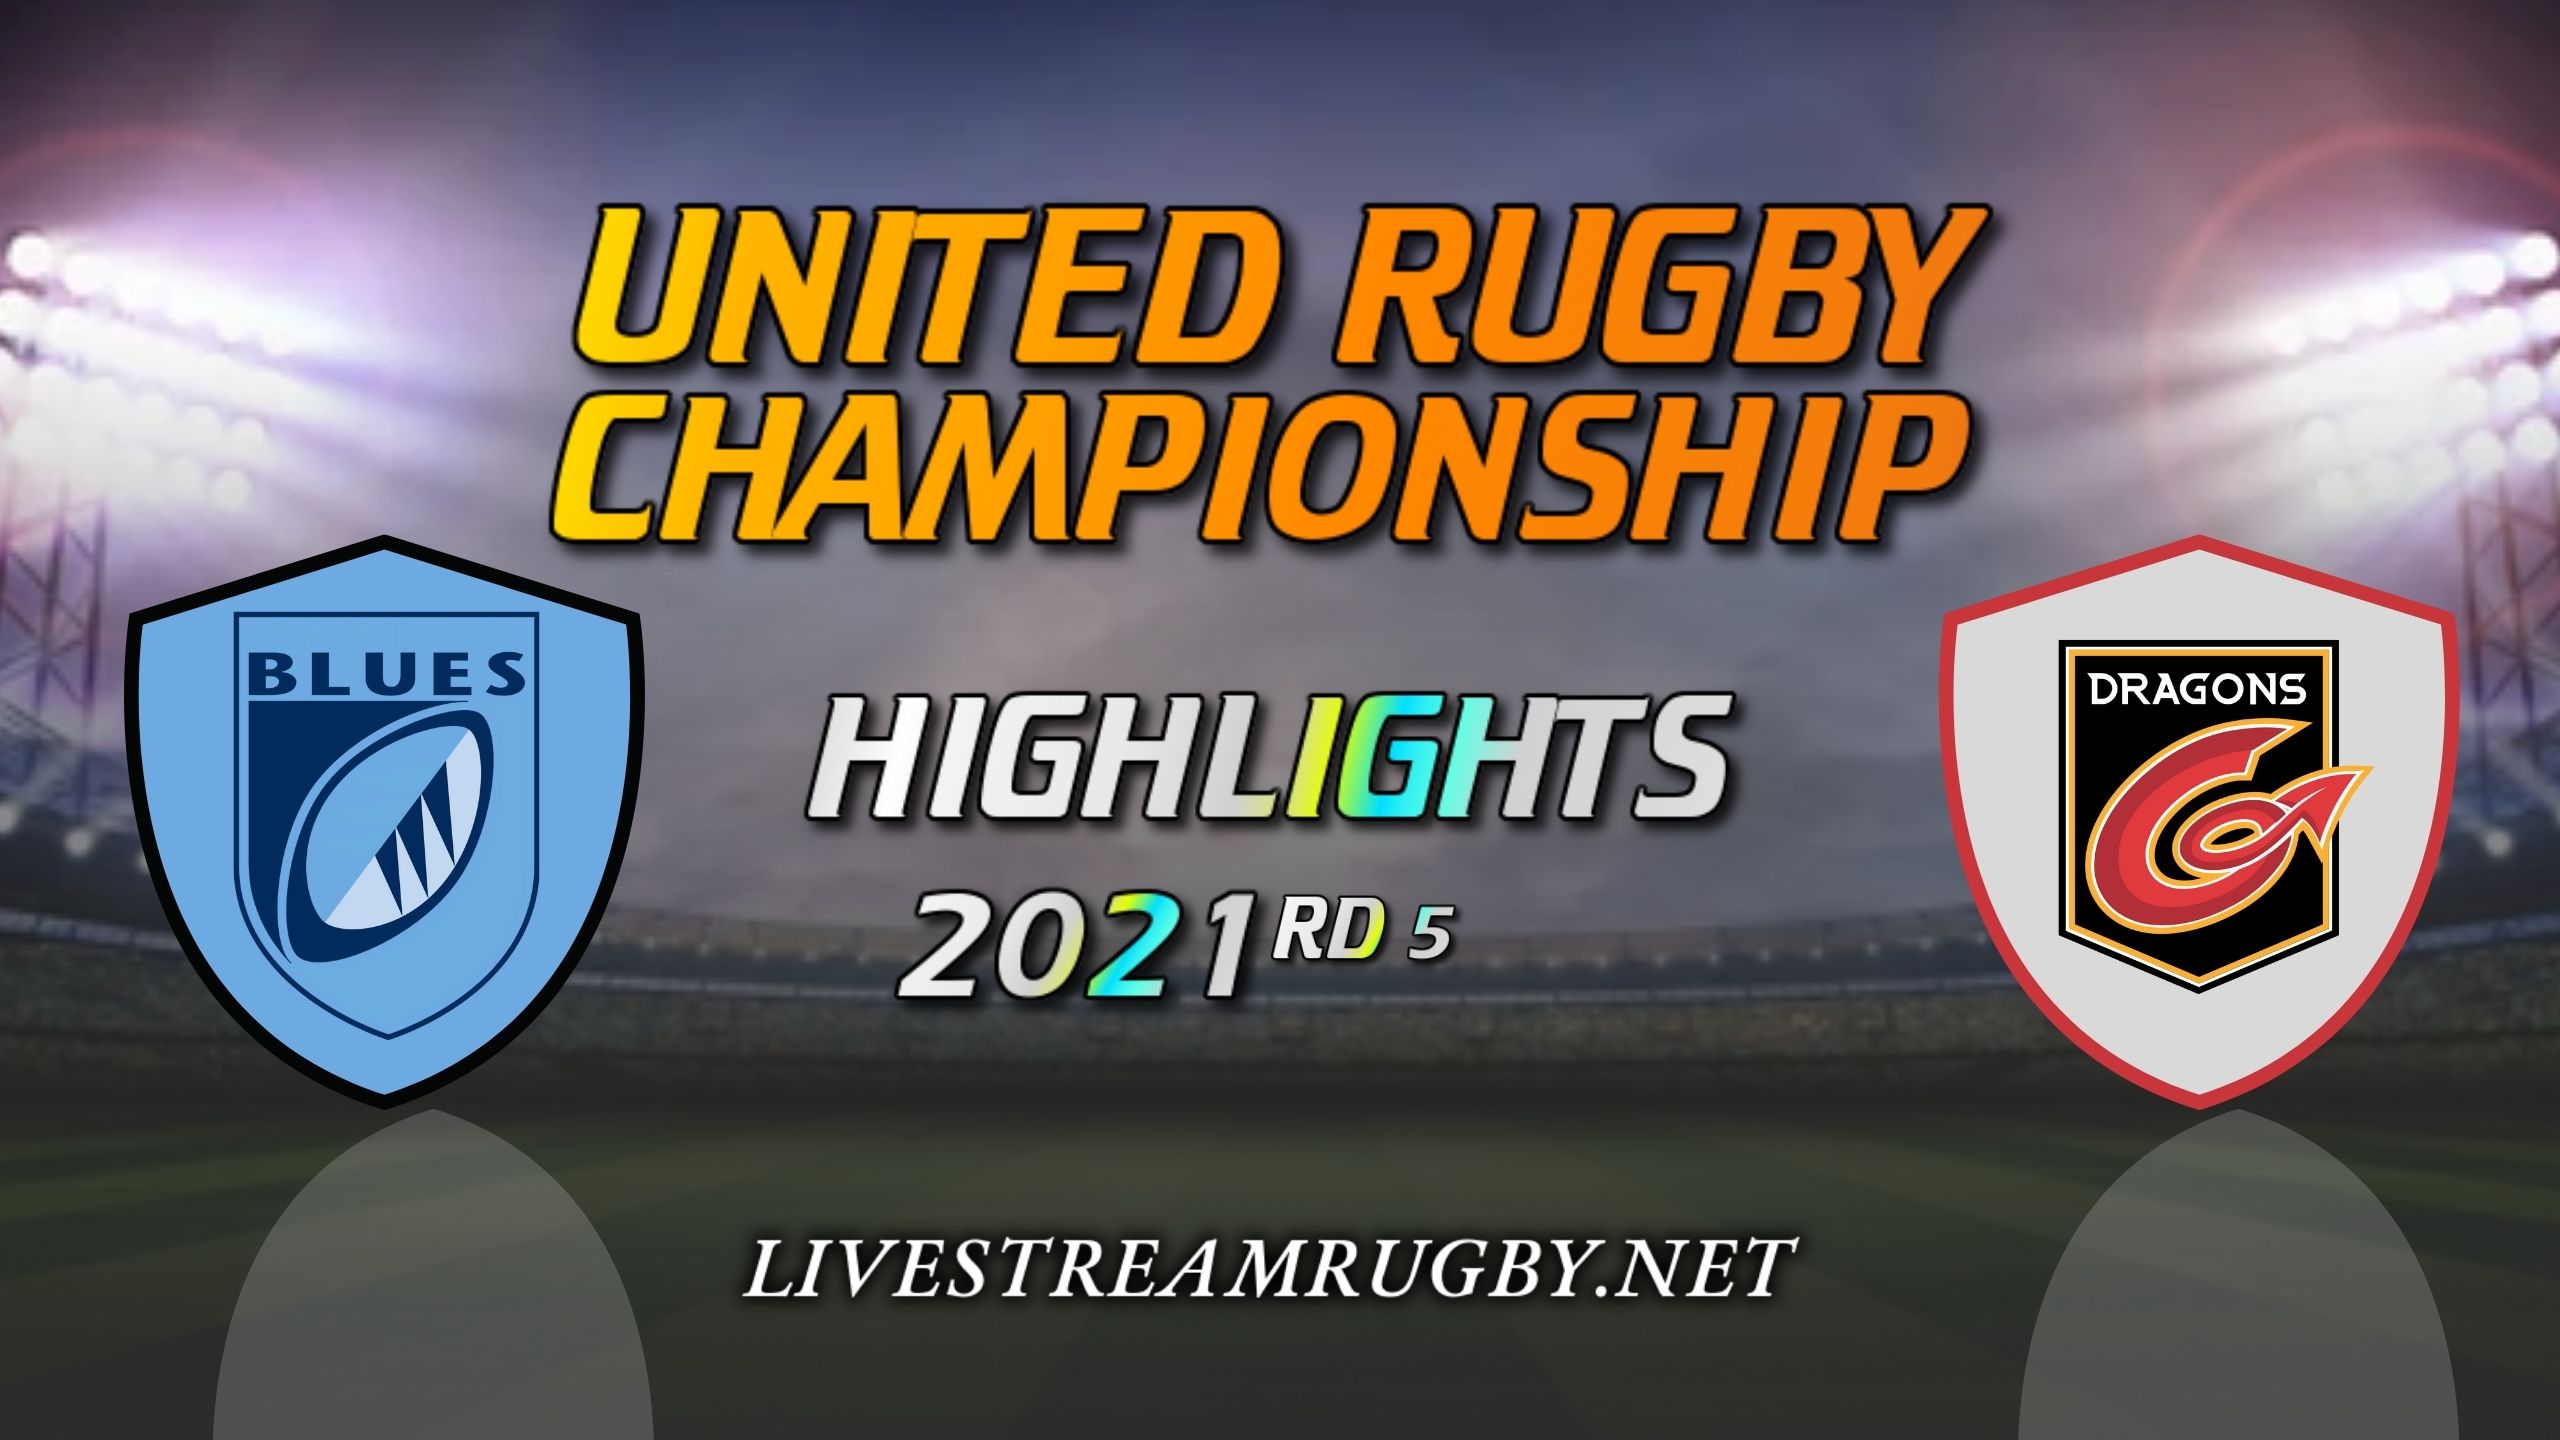 Cardiff Blues Vs Dragons Highlights 2021 Rd 5 United Rugby